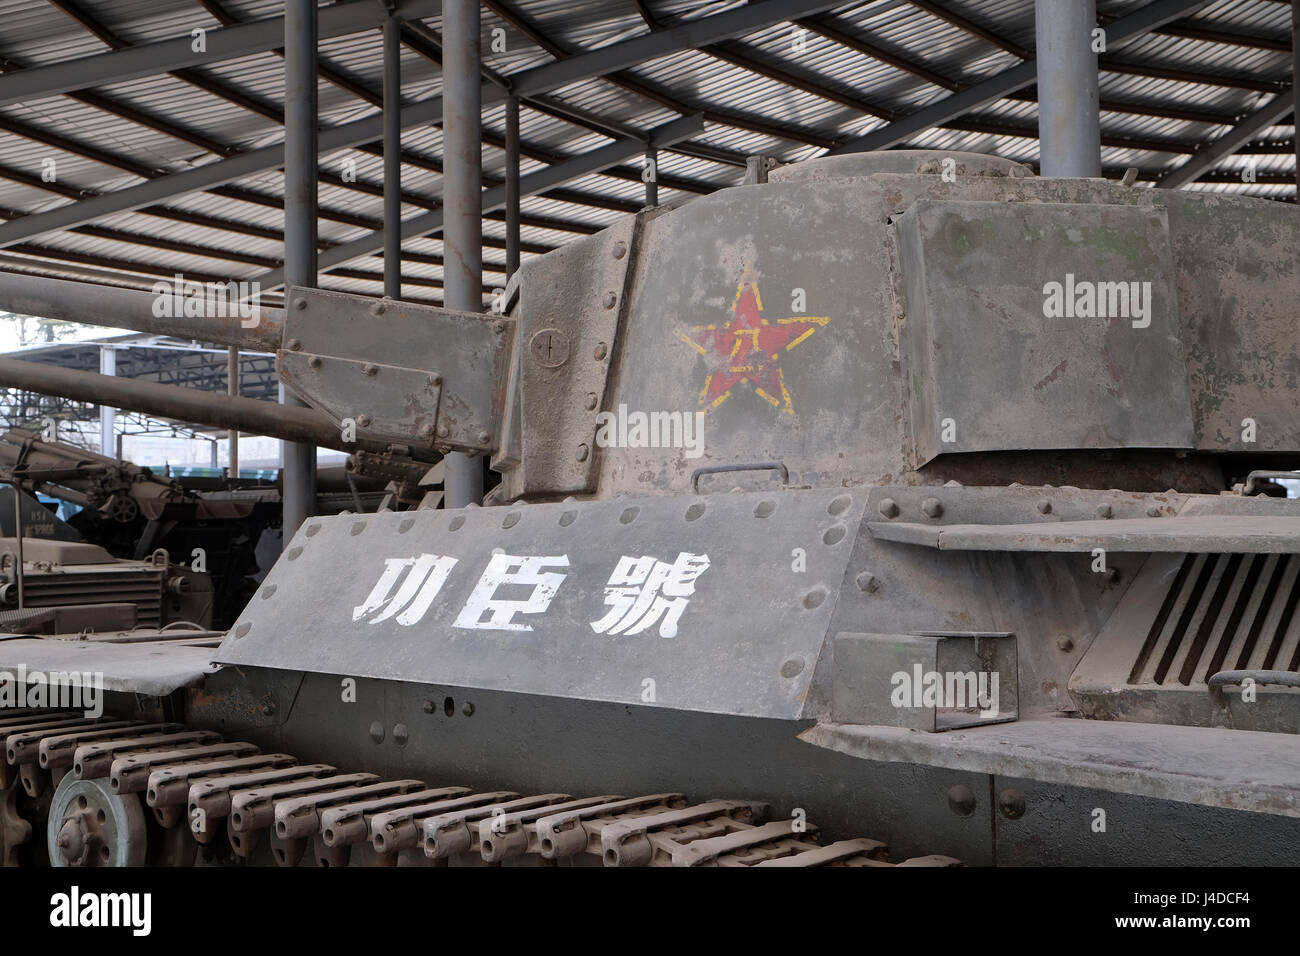 The Japanese T-97 Medium Tank in the Military Museum of the Chinese People's Revolution in Beijing, China, February 25, 2016. Stock Photo